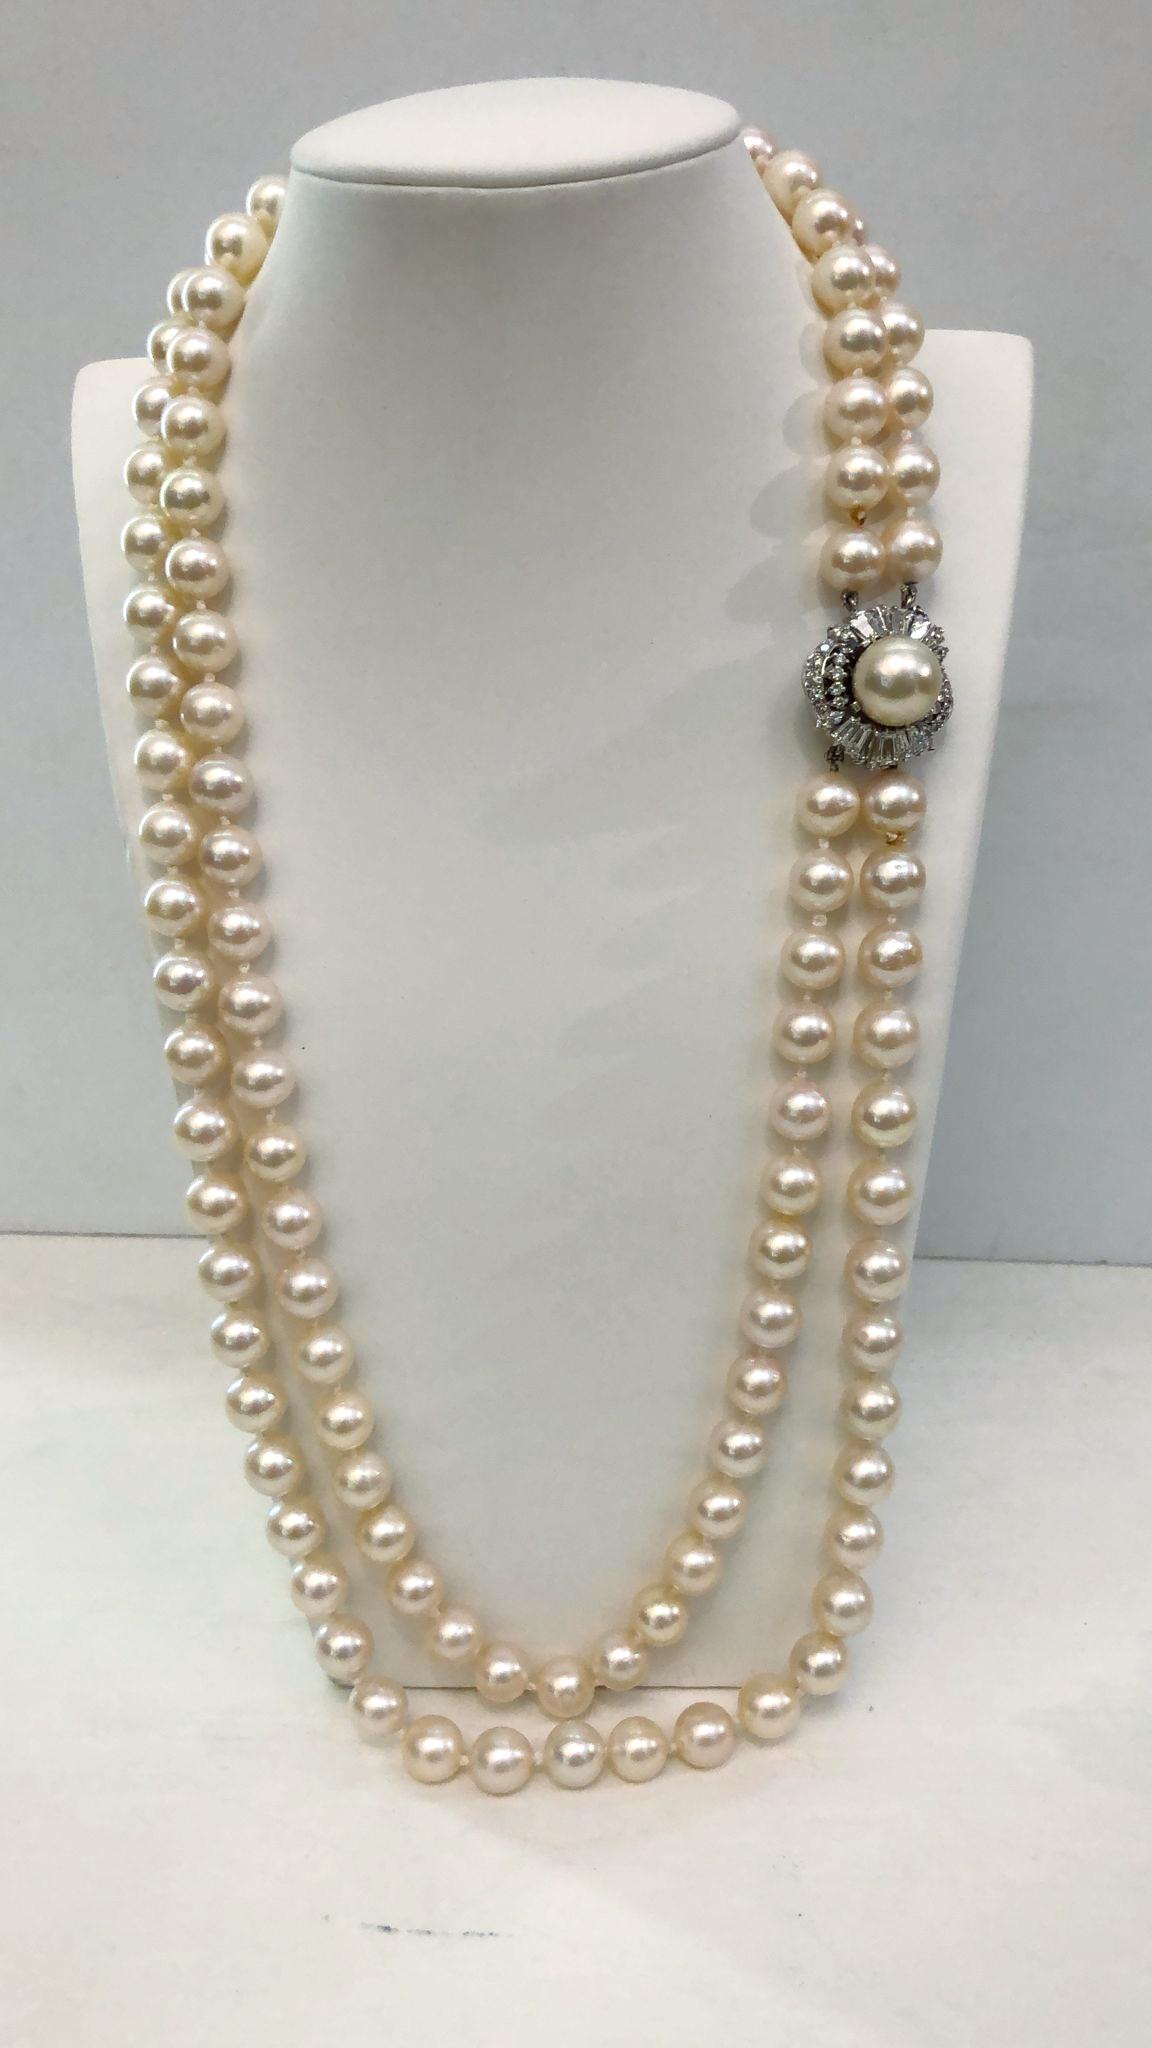 Vintage Italian necklace with two strands of cultured pearls from 9 to 13 mm, with tapered and baguette-cut diamonds for a total of 2.5 carats / Made in Italy 1960s
Matching earrings also available in the size of the necklace clasp